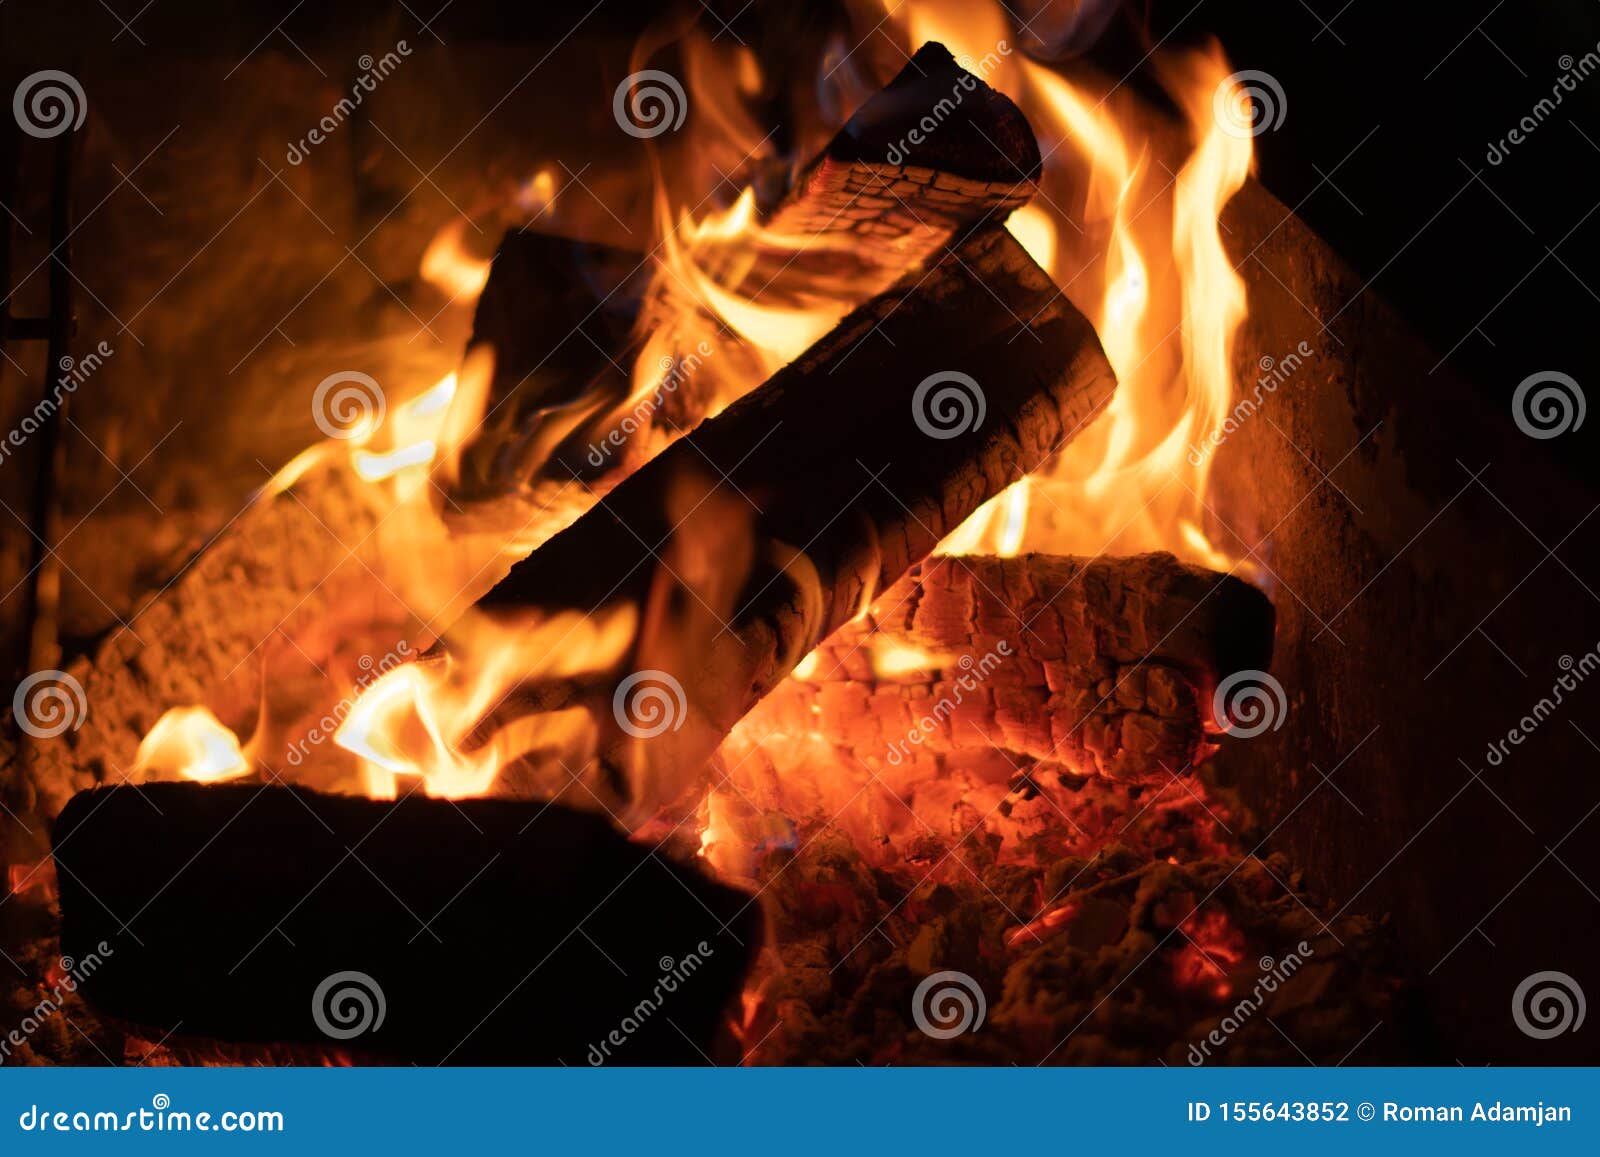 bonfire in the night, embers, wallpaper vintage, clouse up